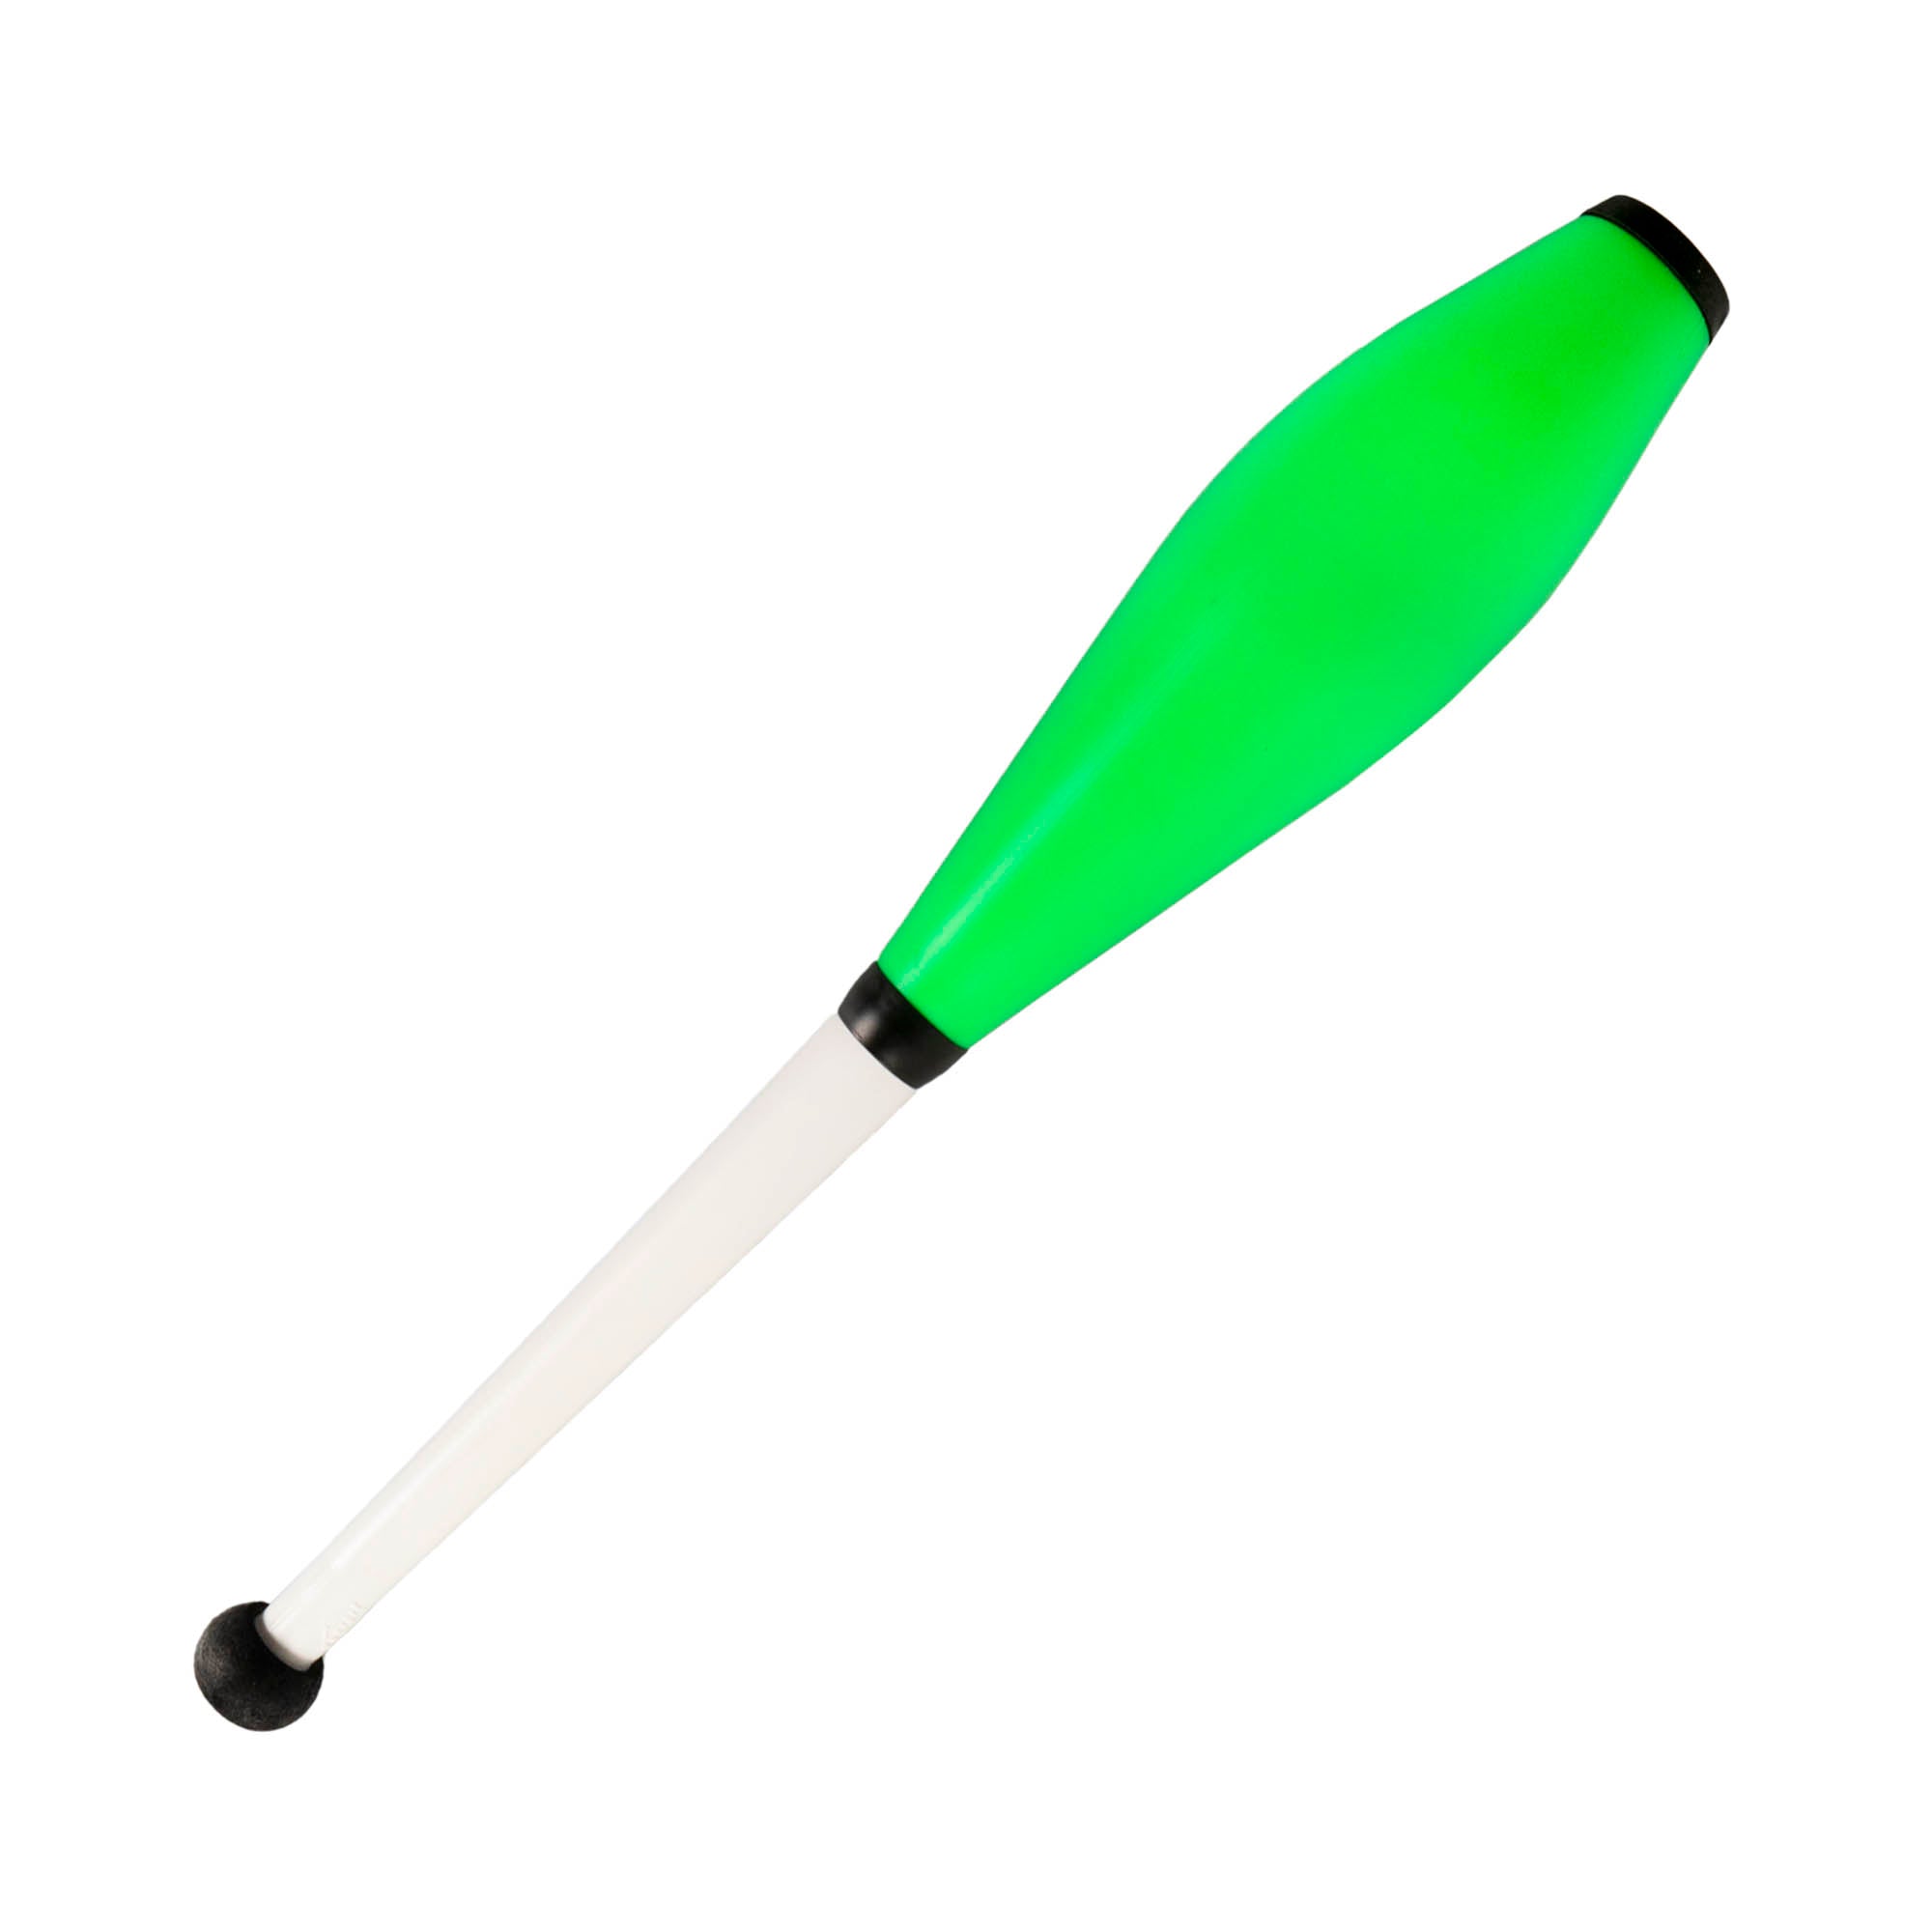 Play PX3 - bright green